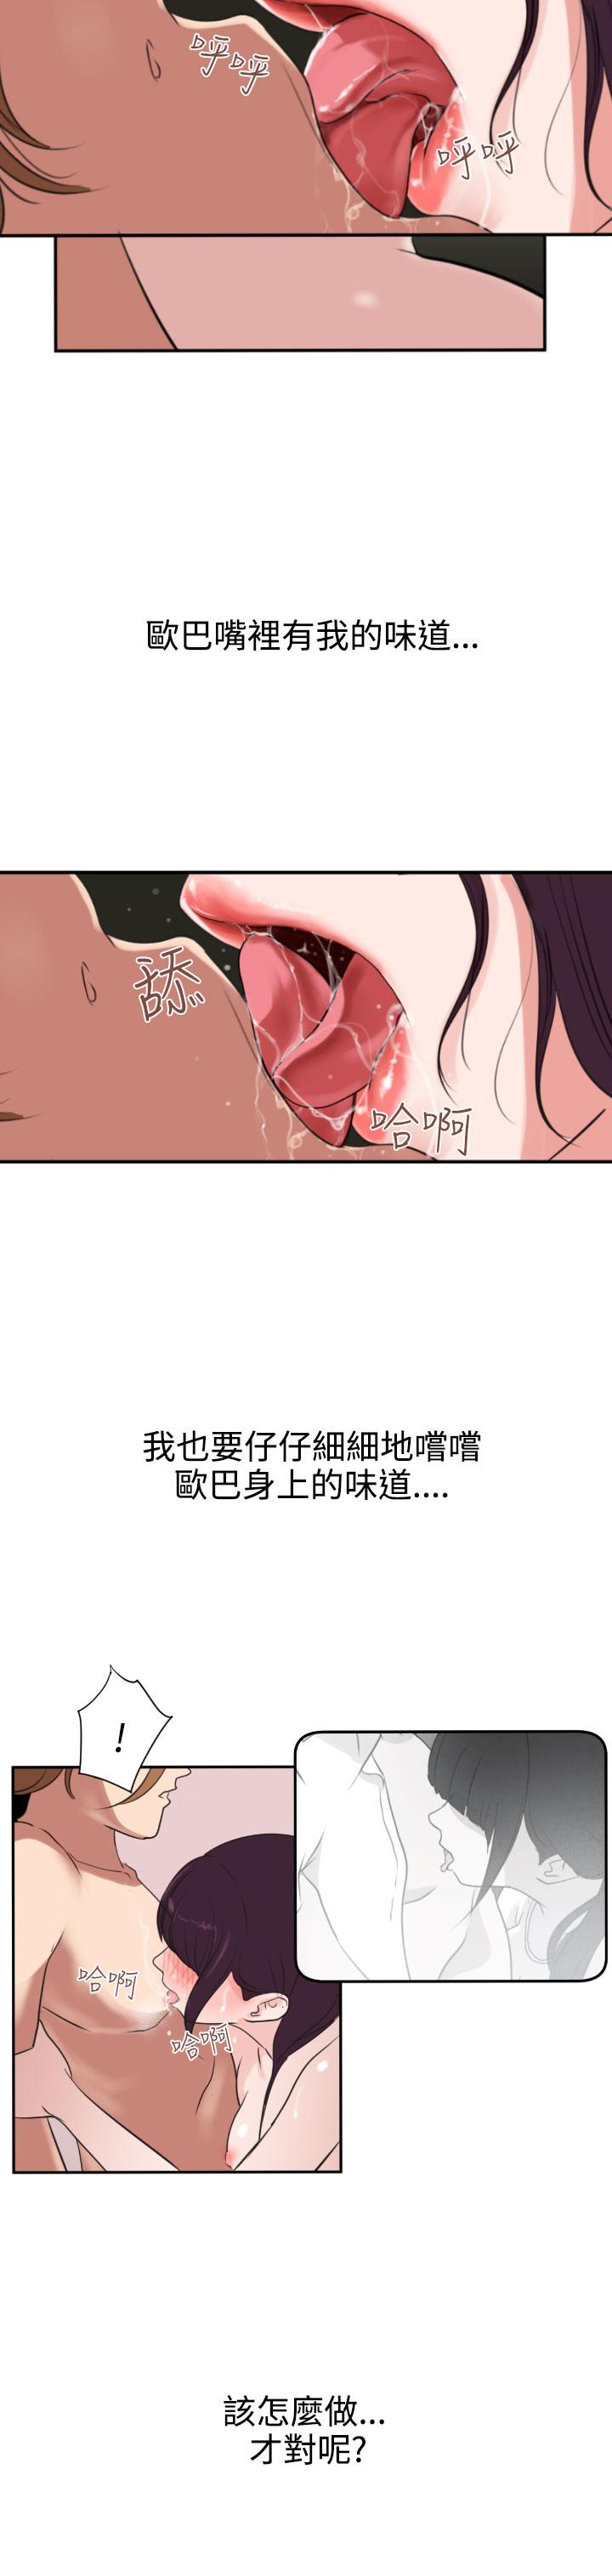 Desire King (慾求王) Ch.1-12 (chinese) 61